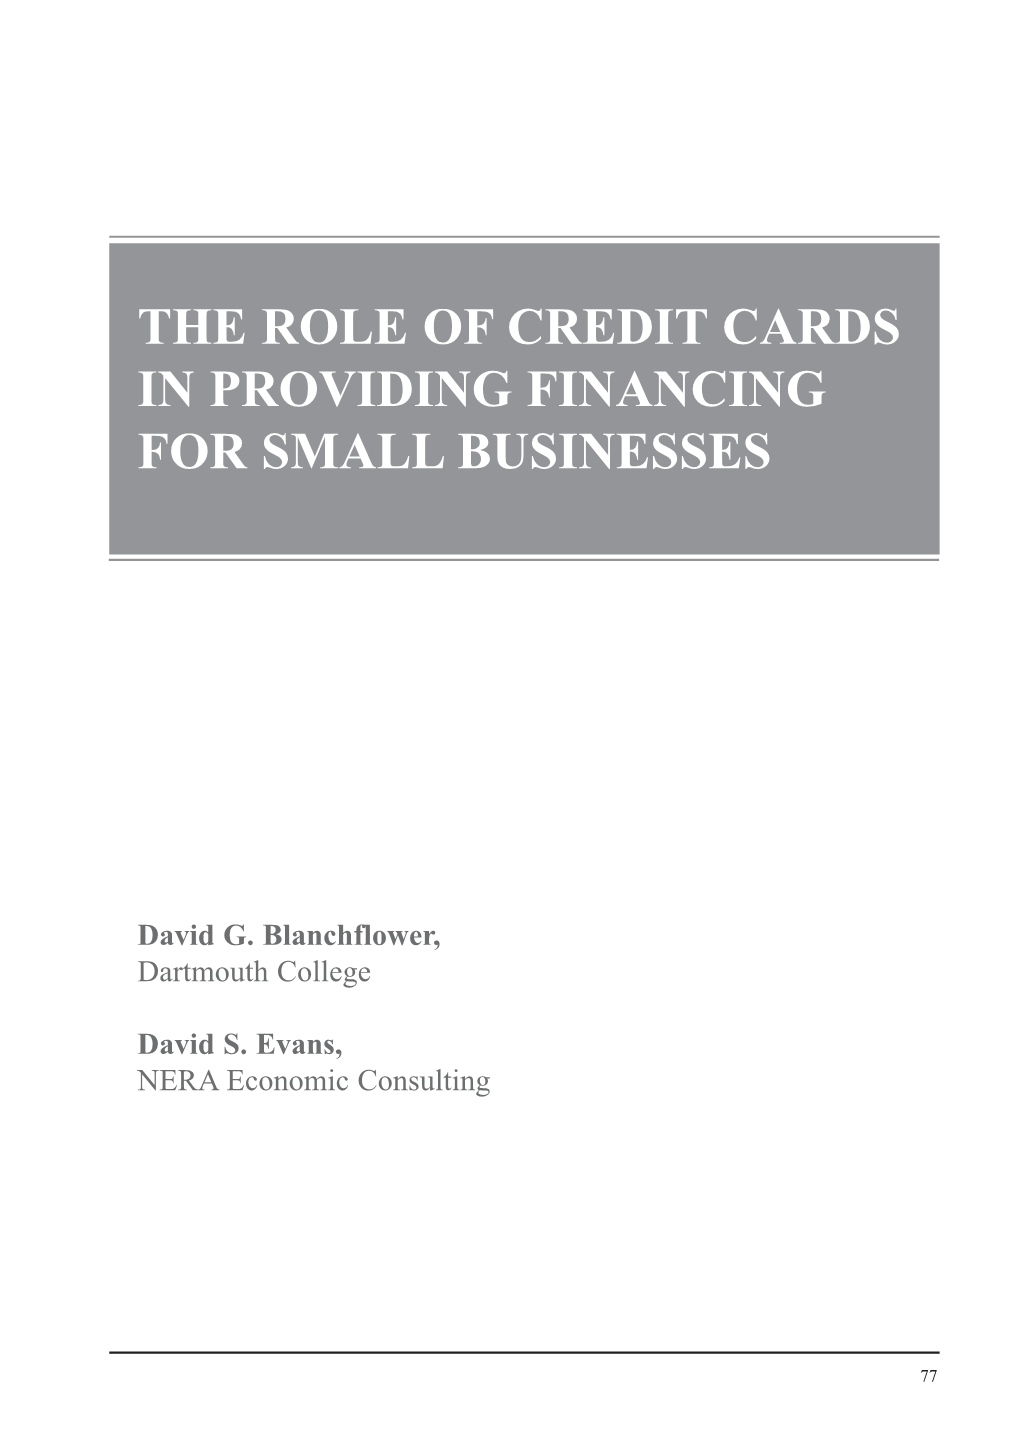 The Role of Credit Cards in Providing Financing for Small Businesses